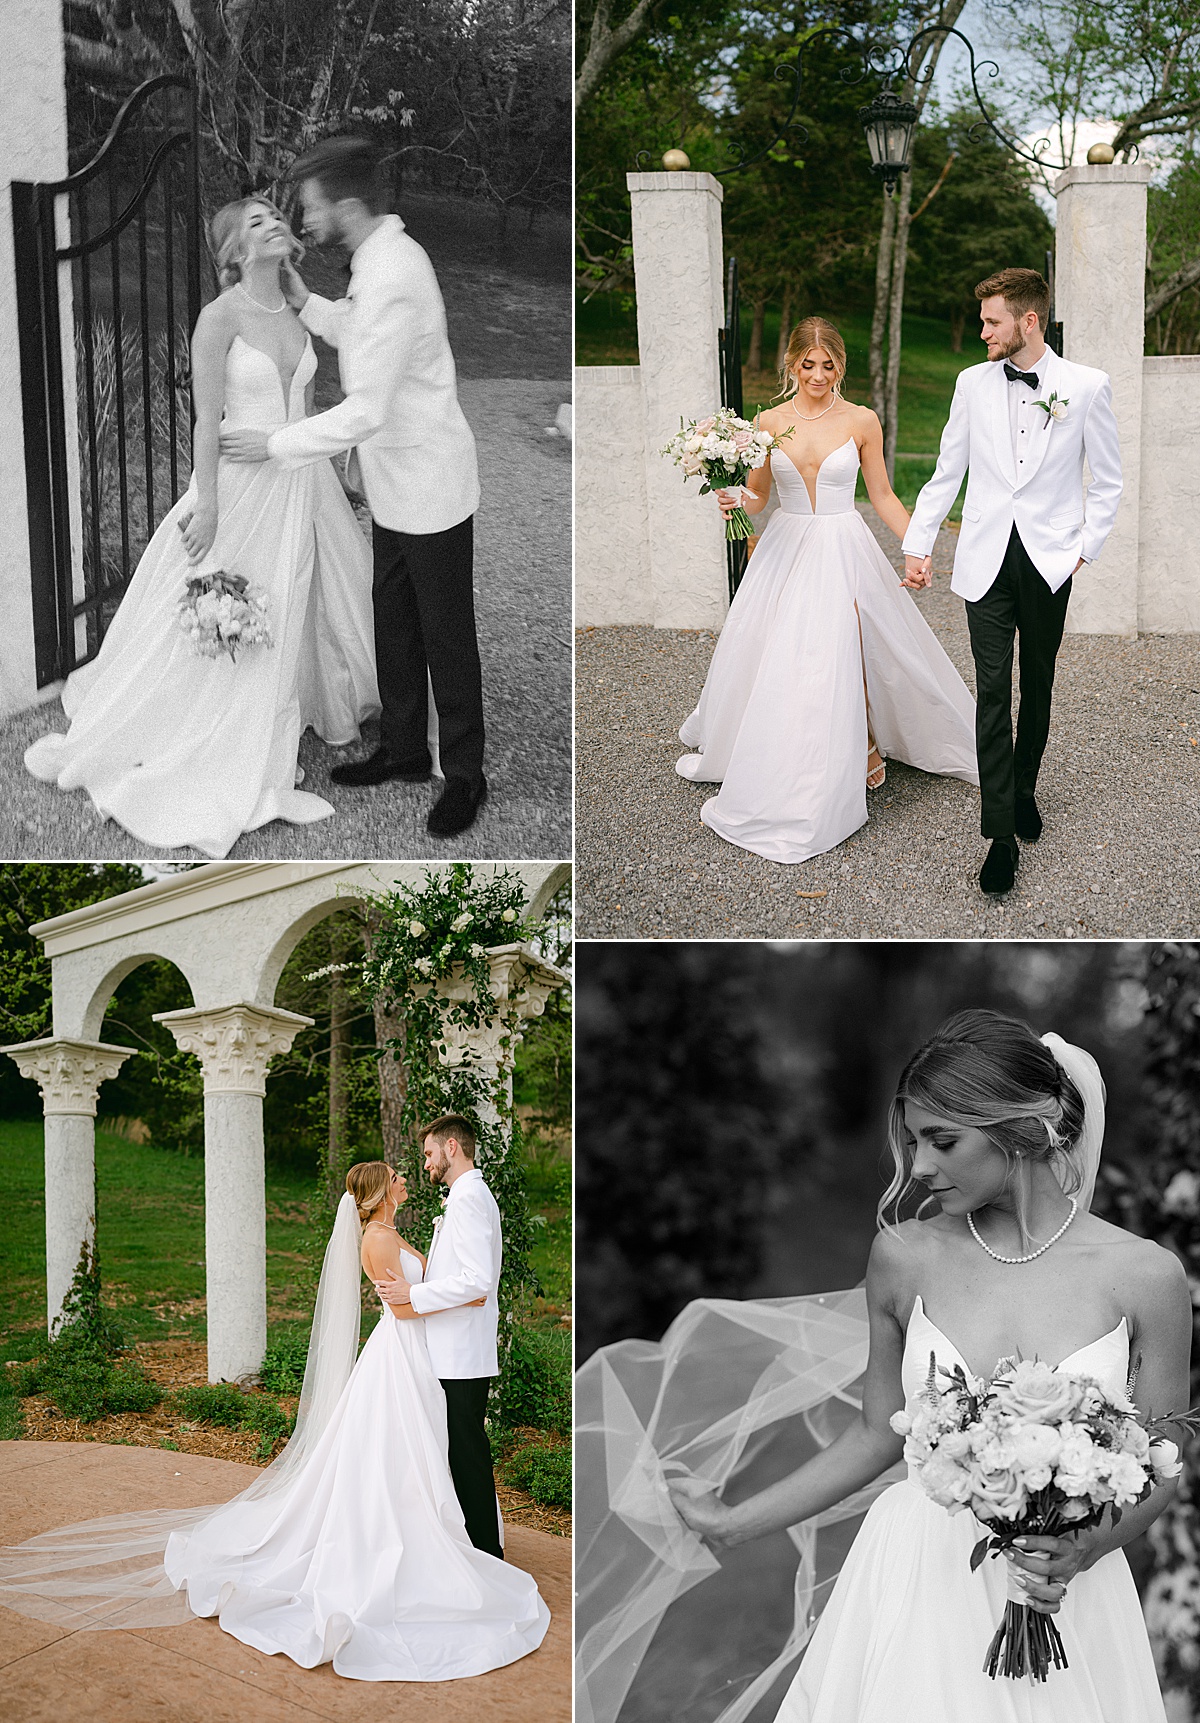 Bride and groom editorial style wedding portraits by the gates of their wedding venue The Woodlands at Five Gables. 